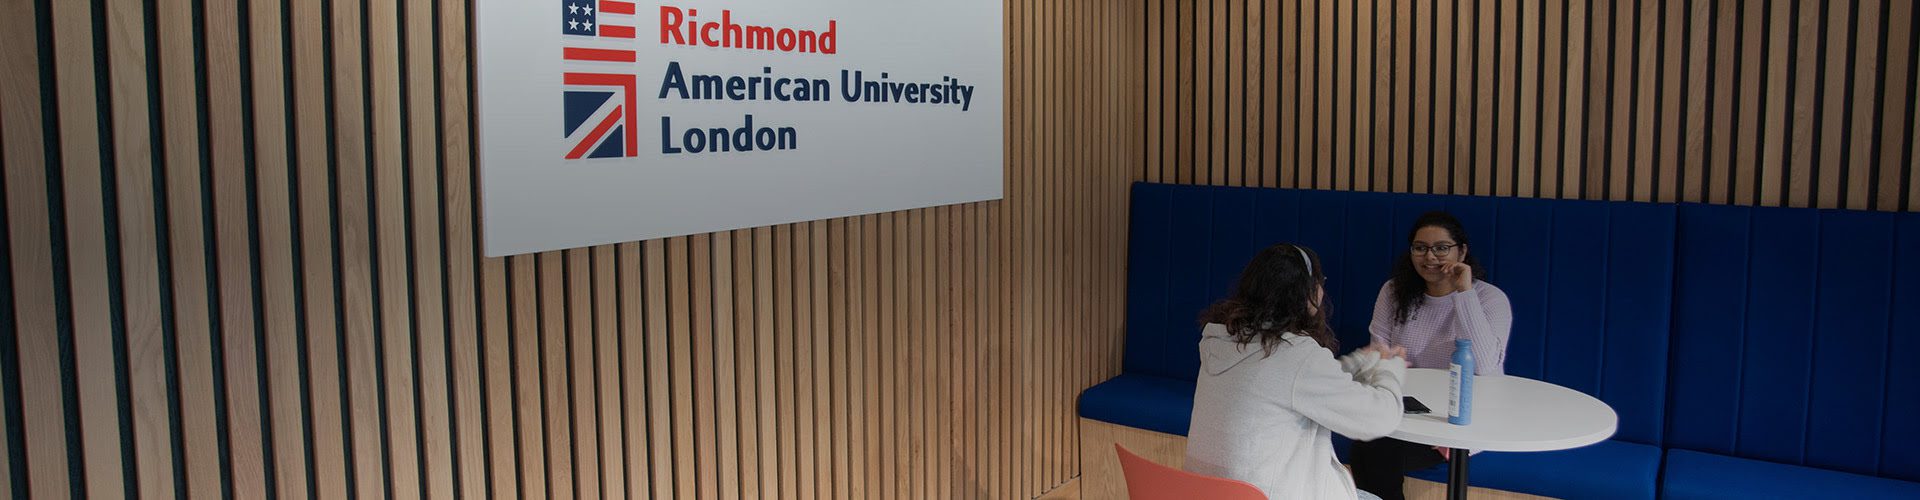 Two people are seated opposite each other at a white table inside a modern room with wooden slats and a sign for Richmond American University London.